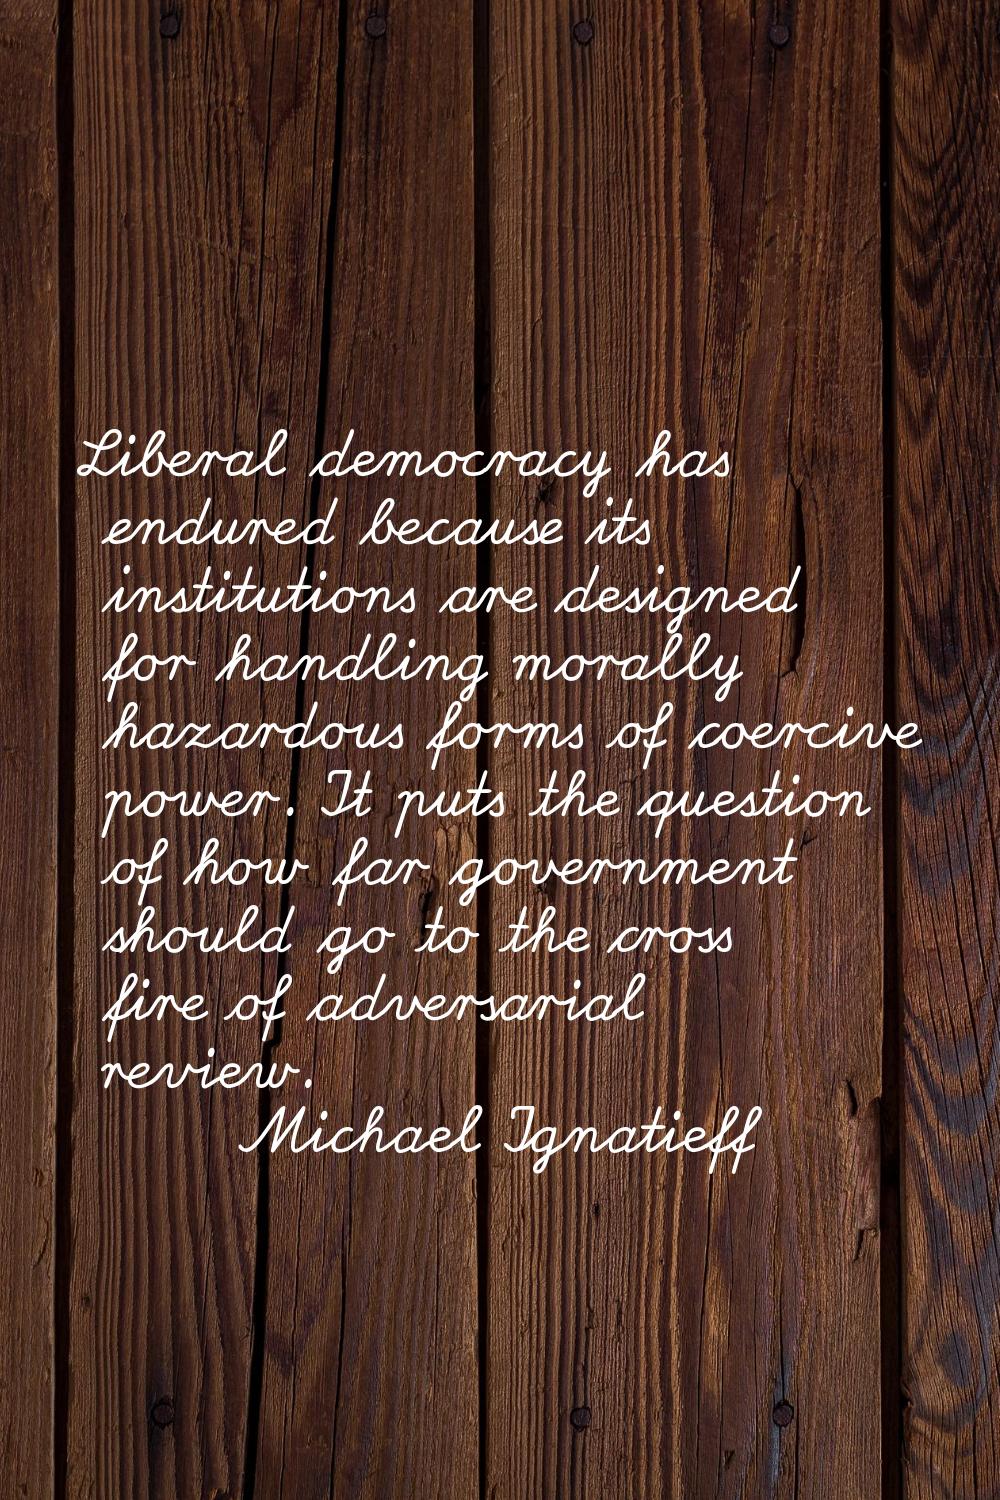 Liberal democracy has endured because its institutions are designed for handling morally hazardous 